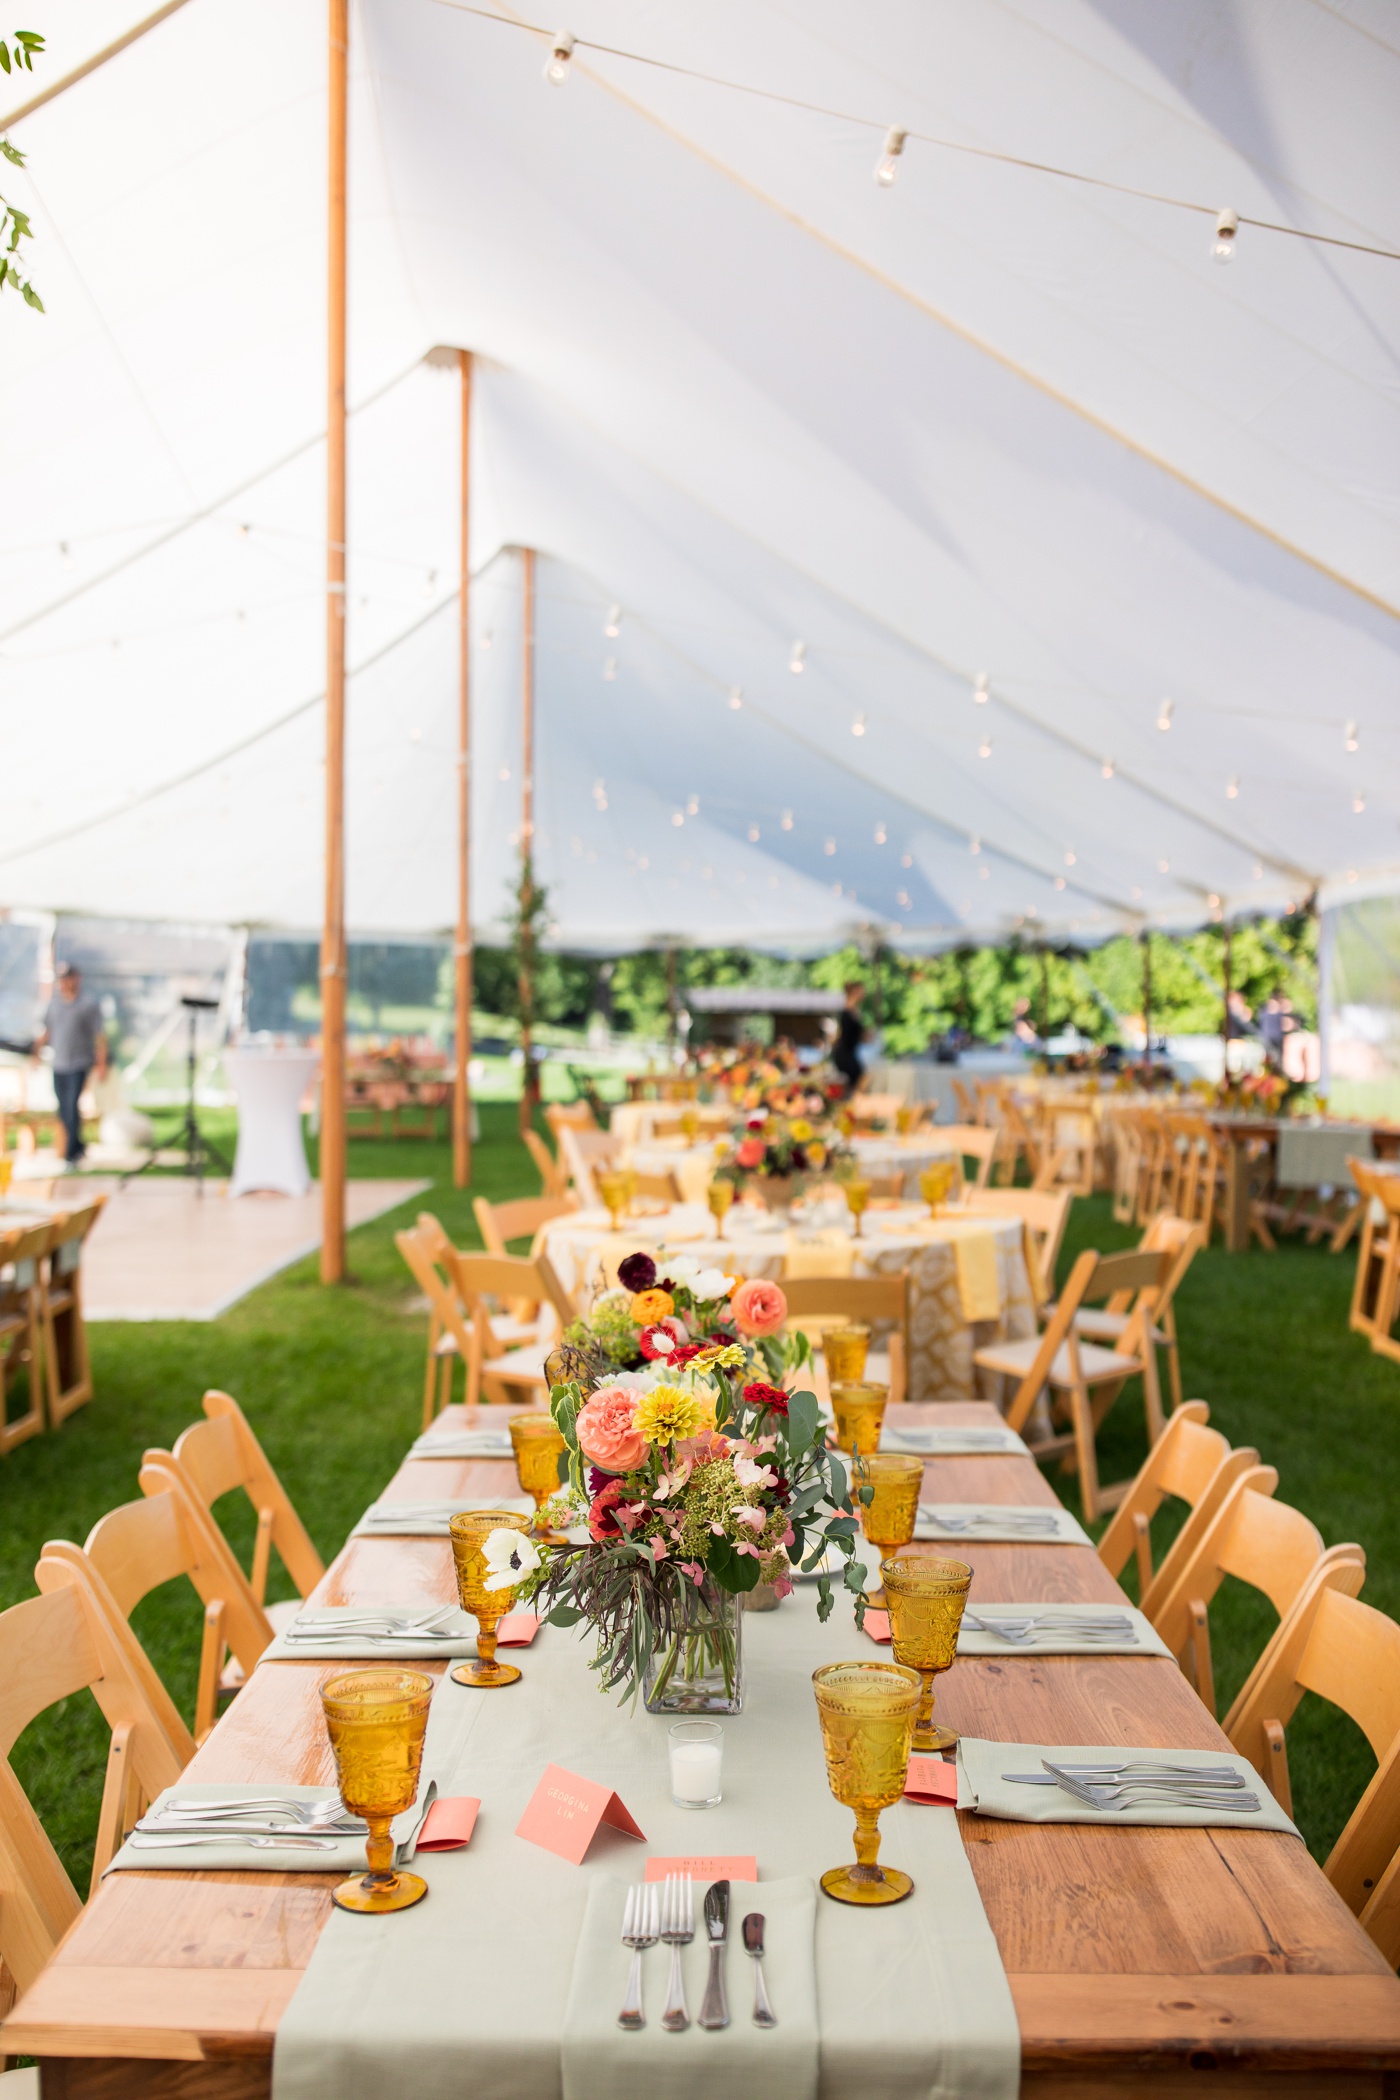 Sage linens, vintage amber goblets, and colorful floral centerpieces for a fall wedding reception